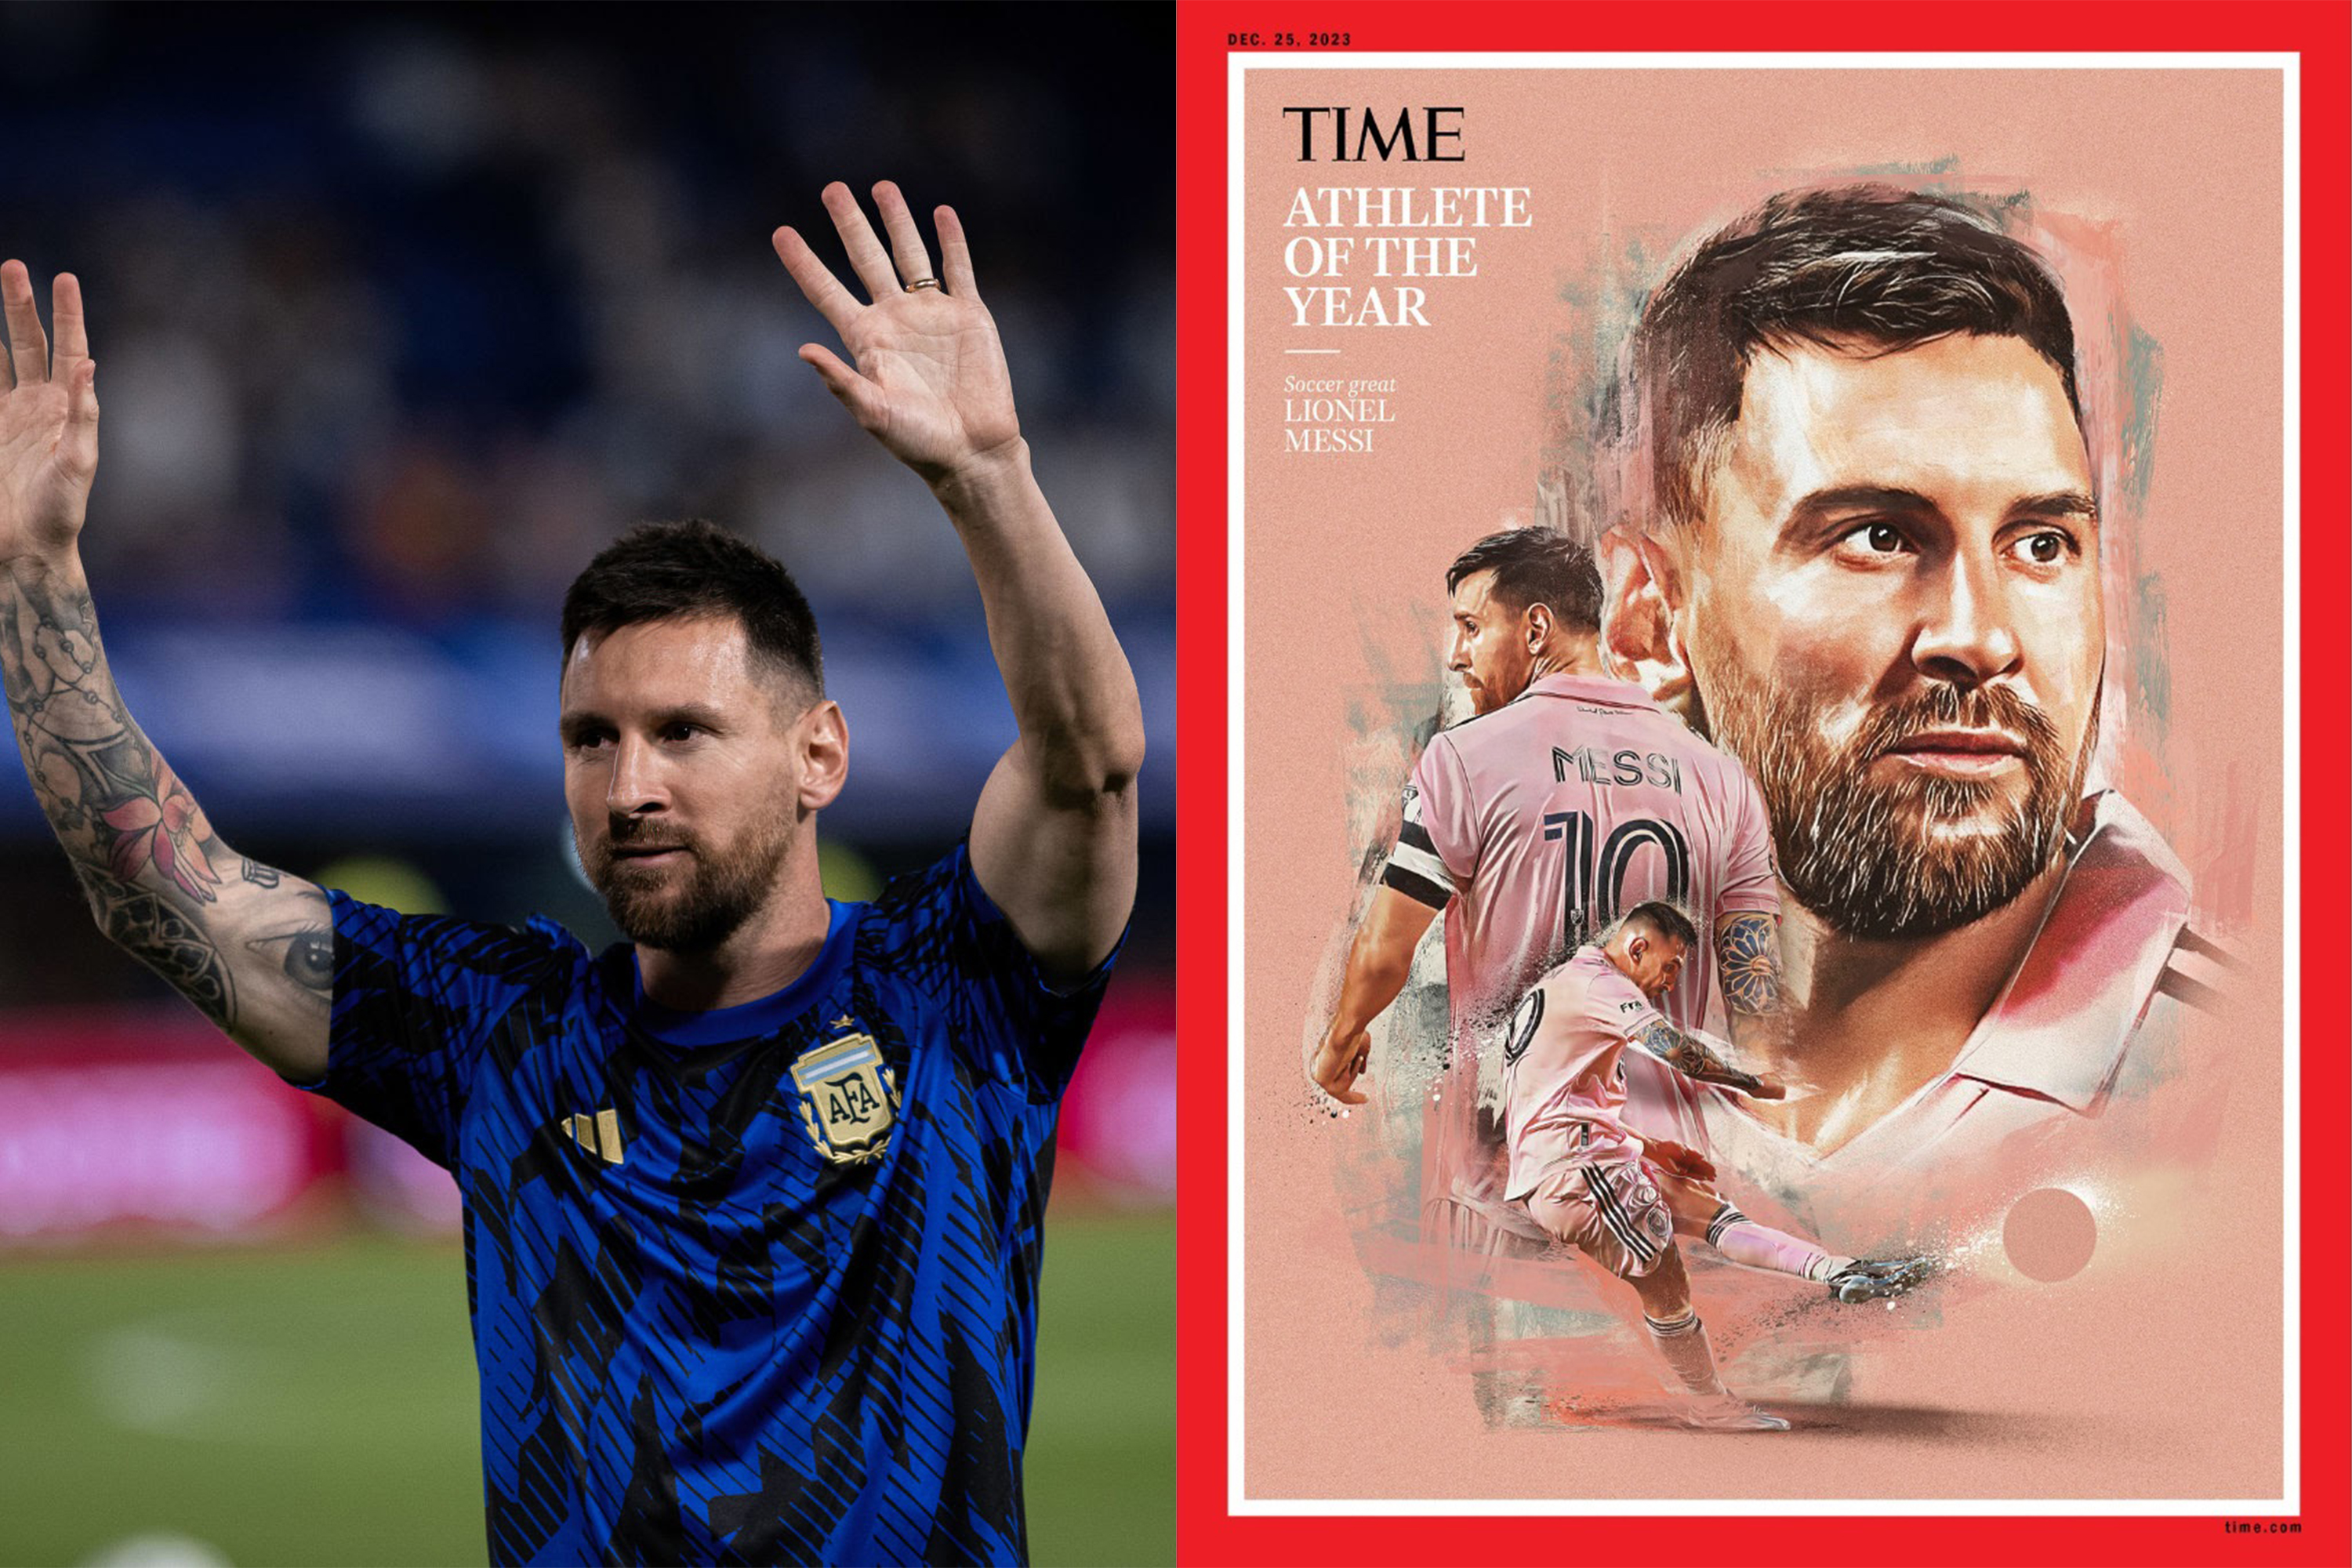 Lionel Messi named Time's ATHLETE OF THE YEAR